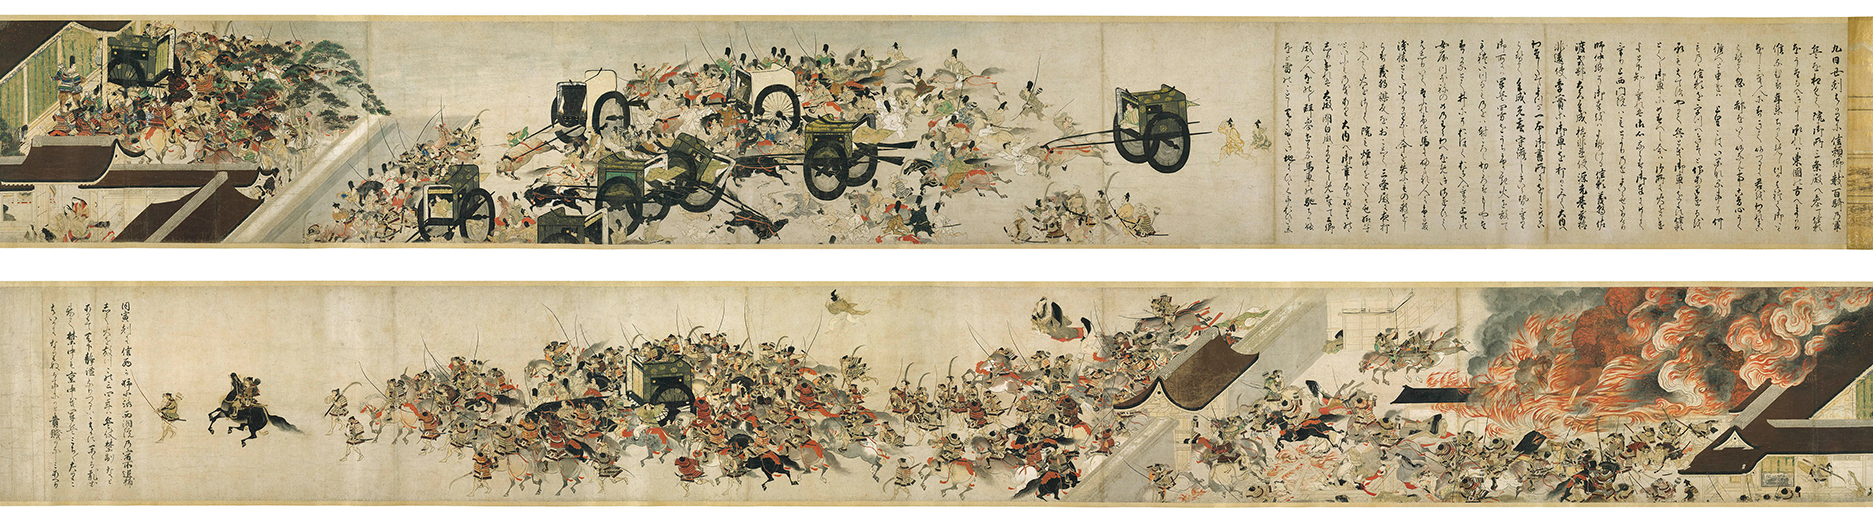 Night Attack on the Sanjô Palace fully unrolled (right side above, left side below), Illustrated Scrolls of the Events of the Heiji Era (Heiji monogatari emaki) Japanese, Kamakura period, second half of the 13th century, 45.9 x 774.5 x 7.6 cm (Museum of Fine Arts, Boston)